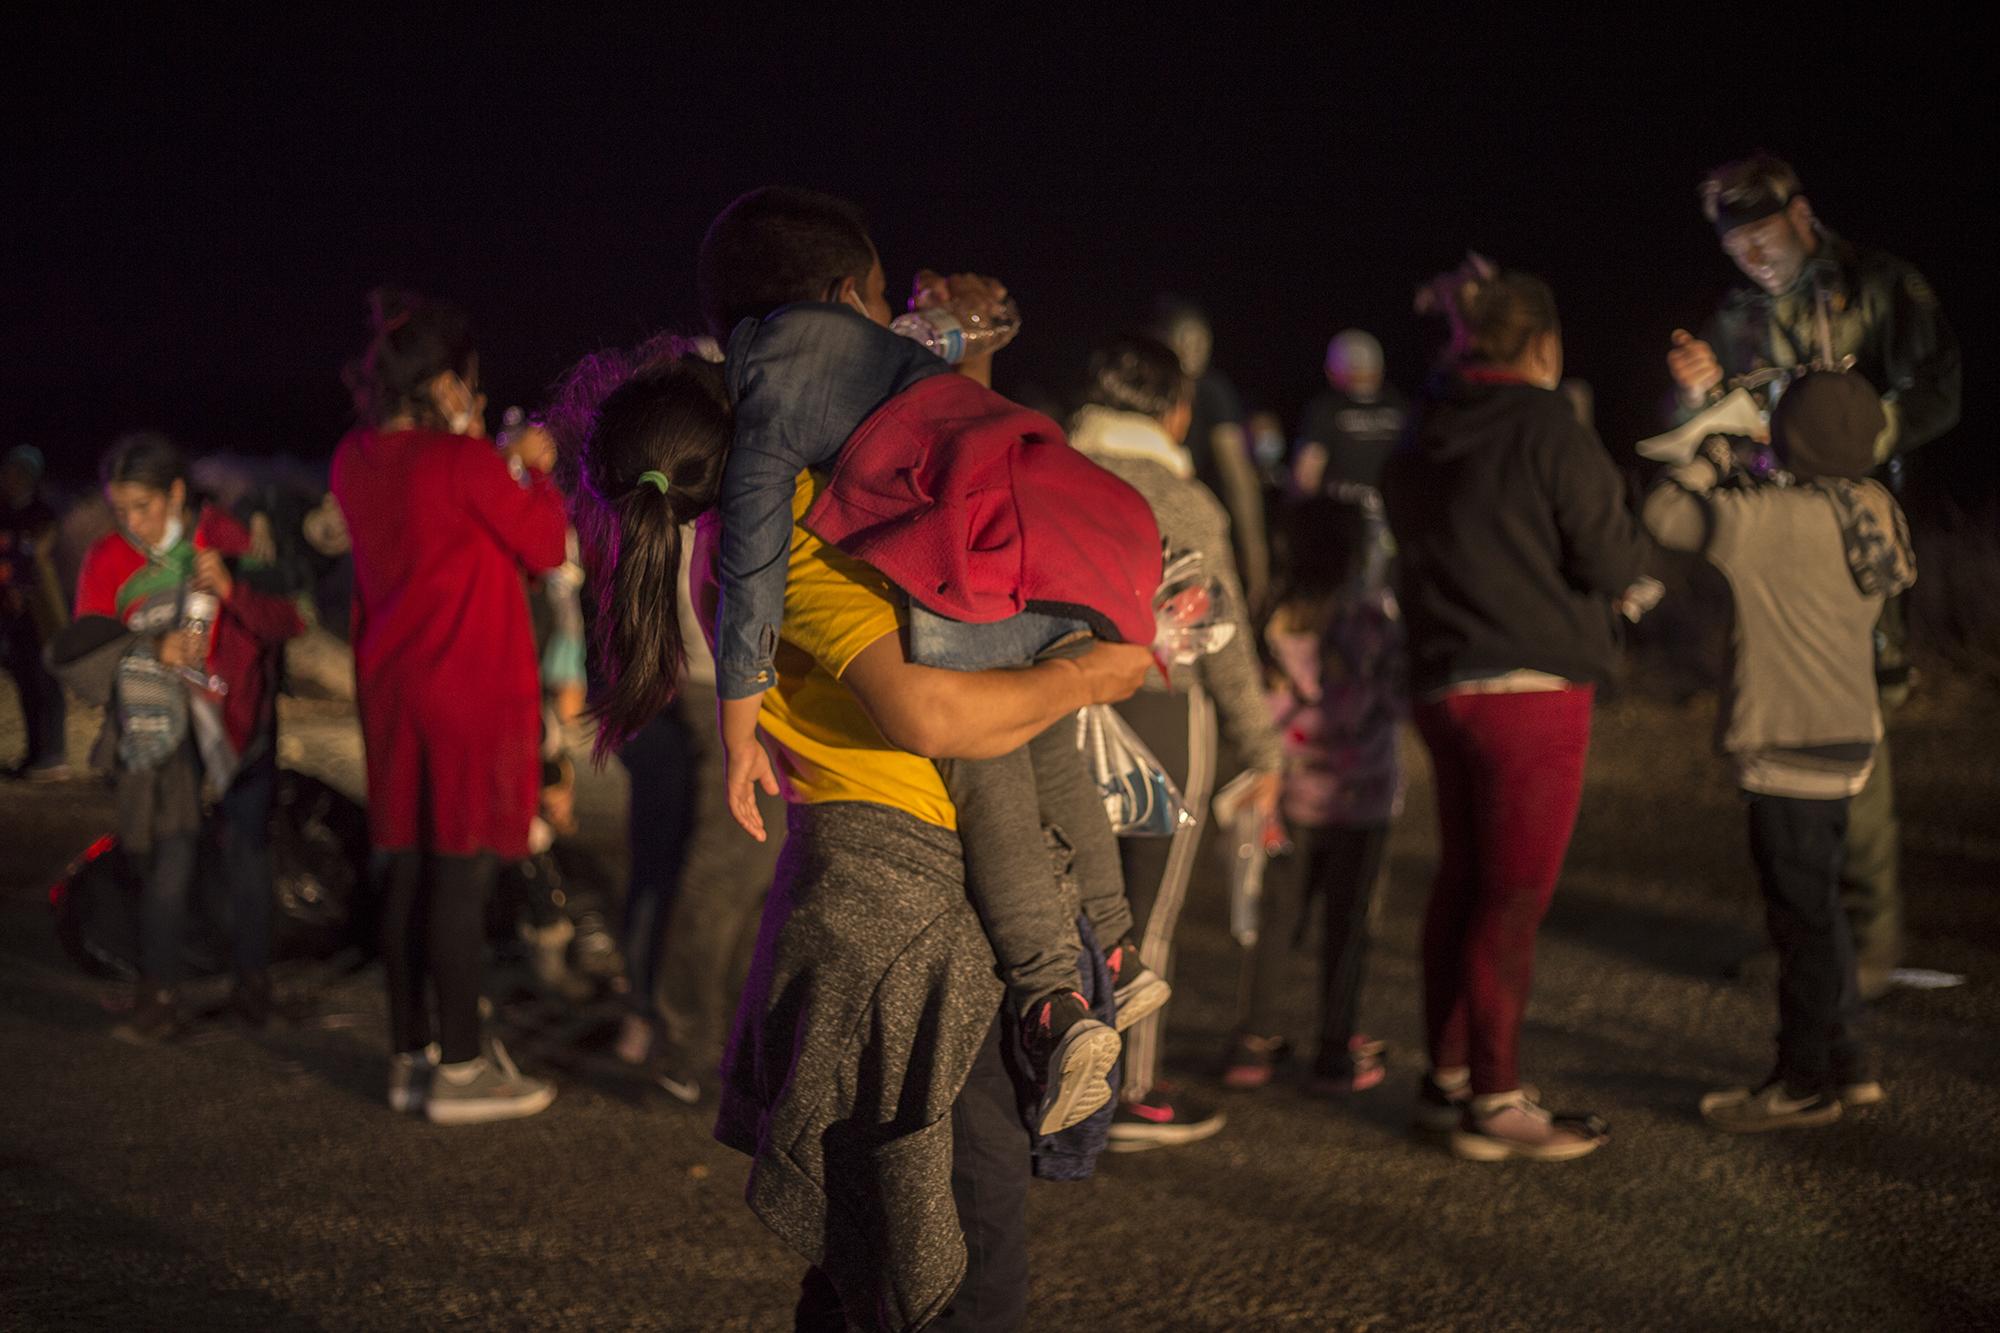 In the span of four hours on Friday evening, March 26, some 300 undocumented adult migrants, most traveling with one or two minors, crossed the border between the cities of Miguel Alemán, Tamaulipas and Roma, Texas to turn themselves in to the U.S. Border Patrol. Accompanying the group were around 20 minors traveling on their own.